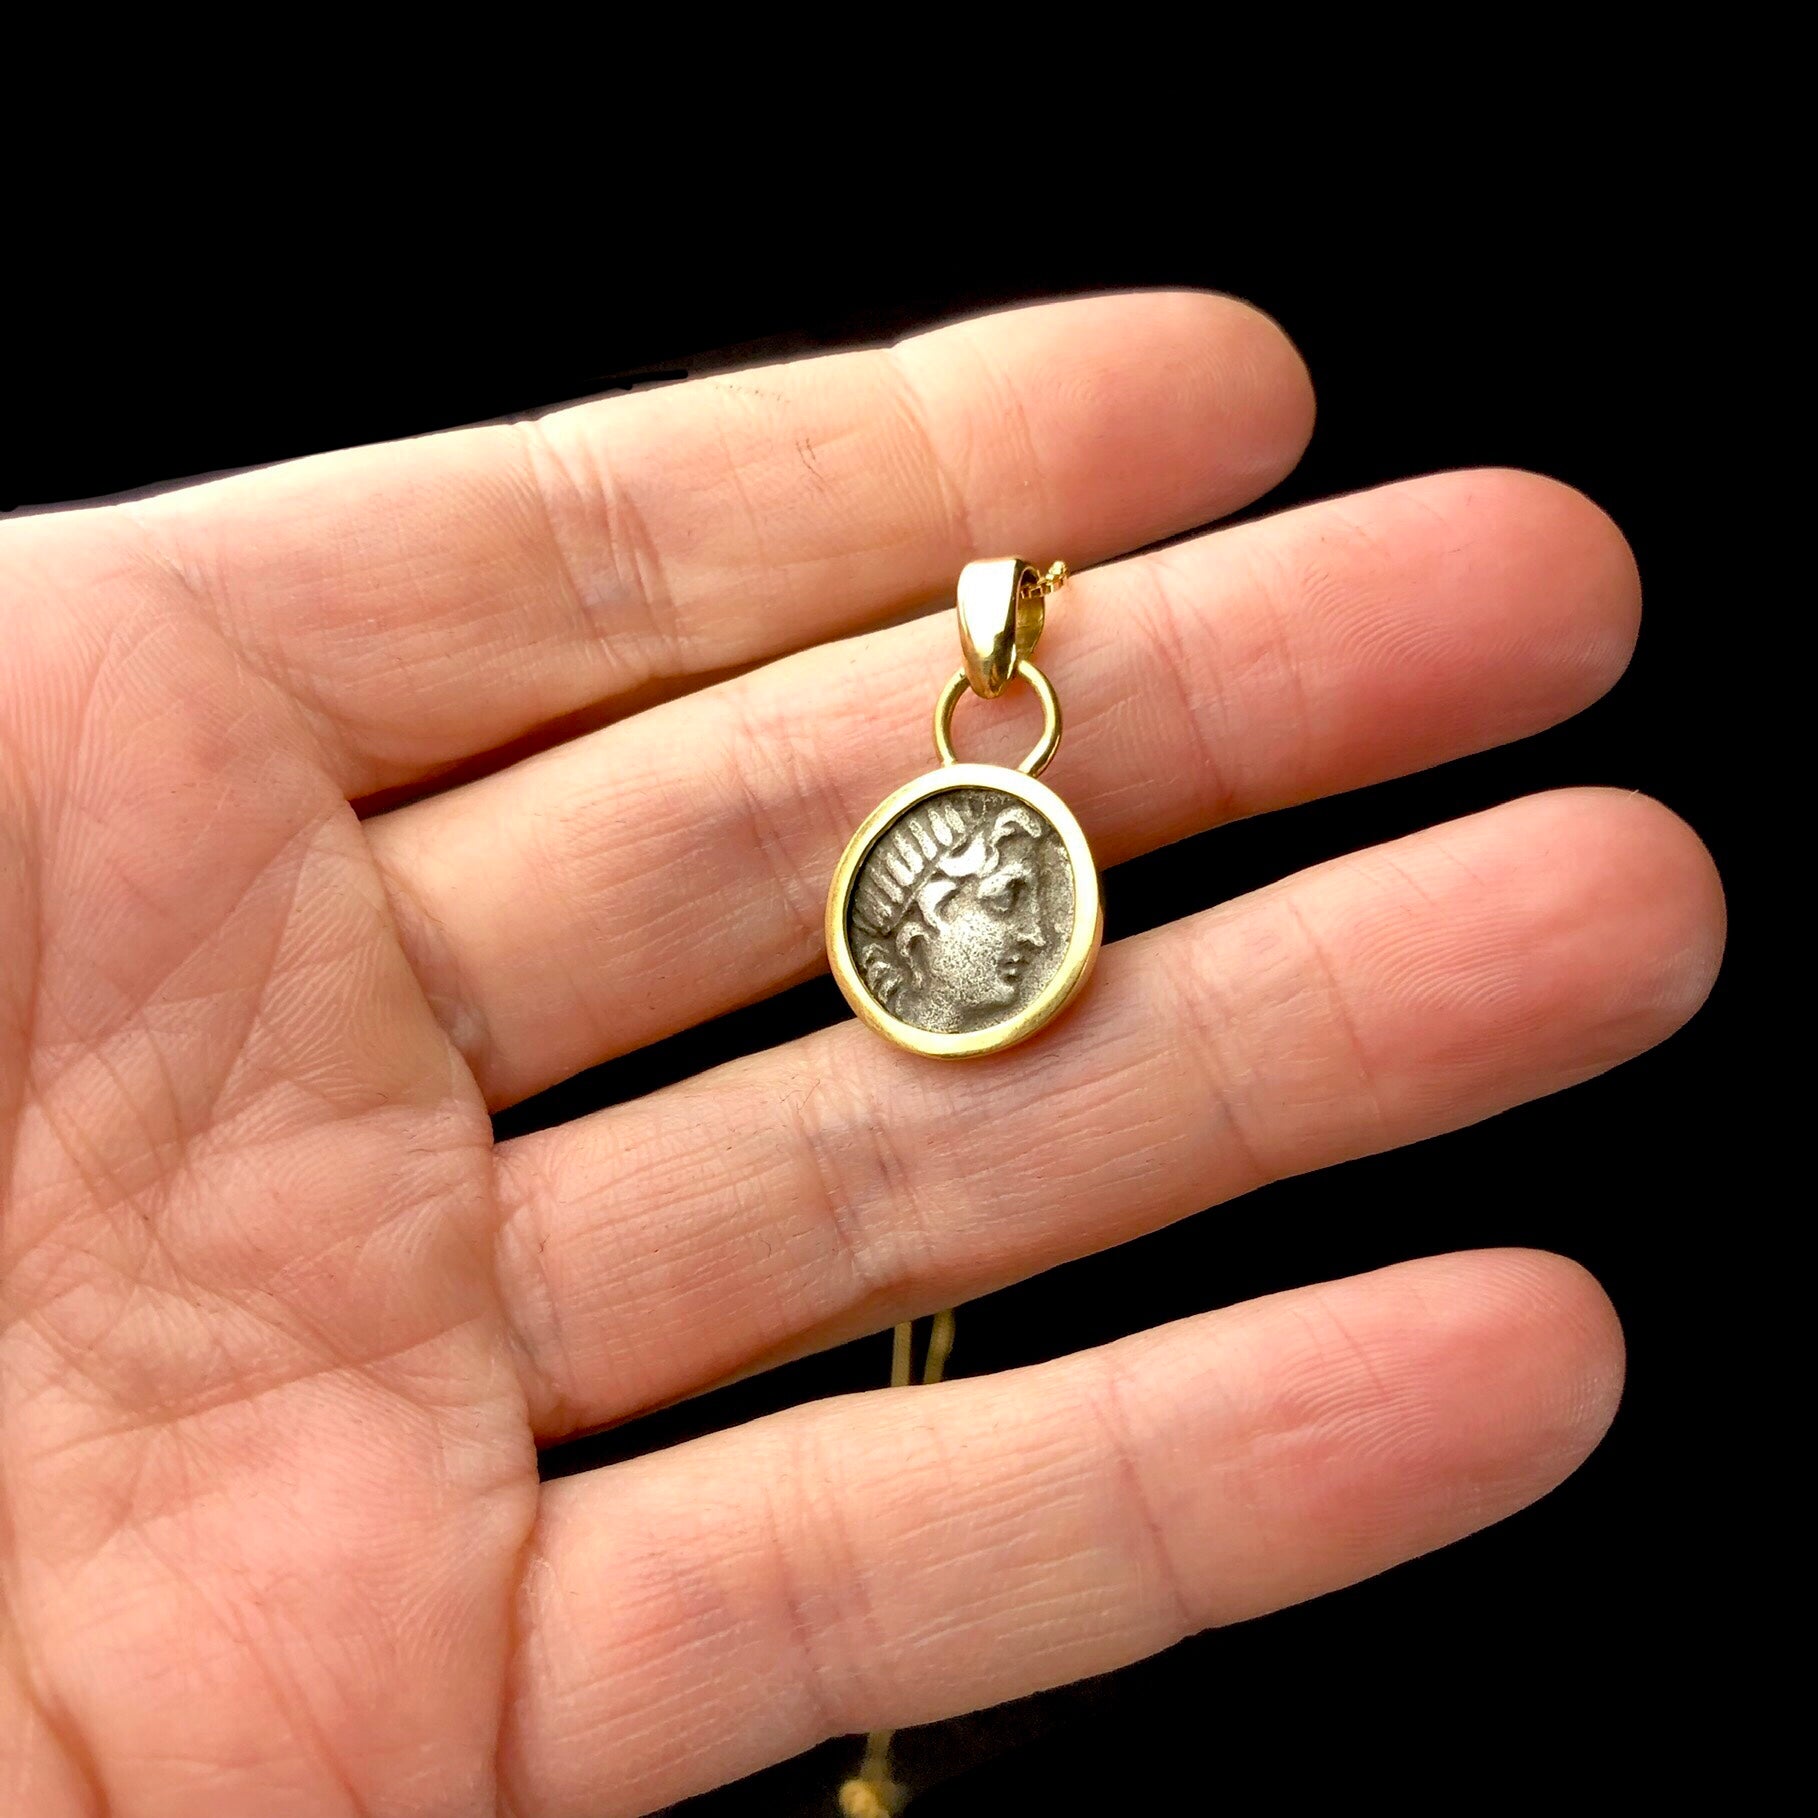 Helios Coin Pendent shown in hand